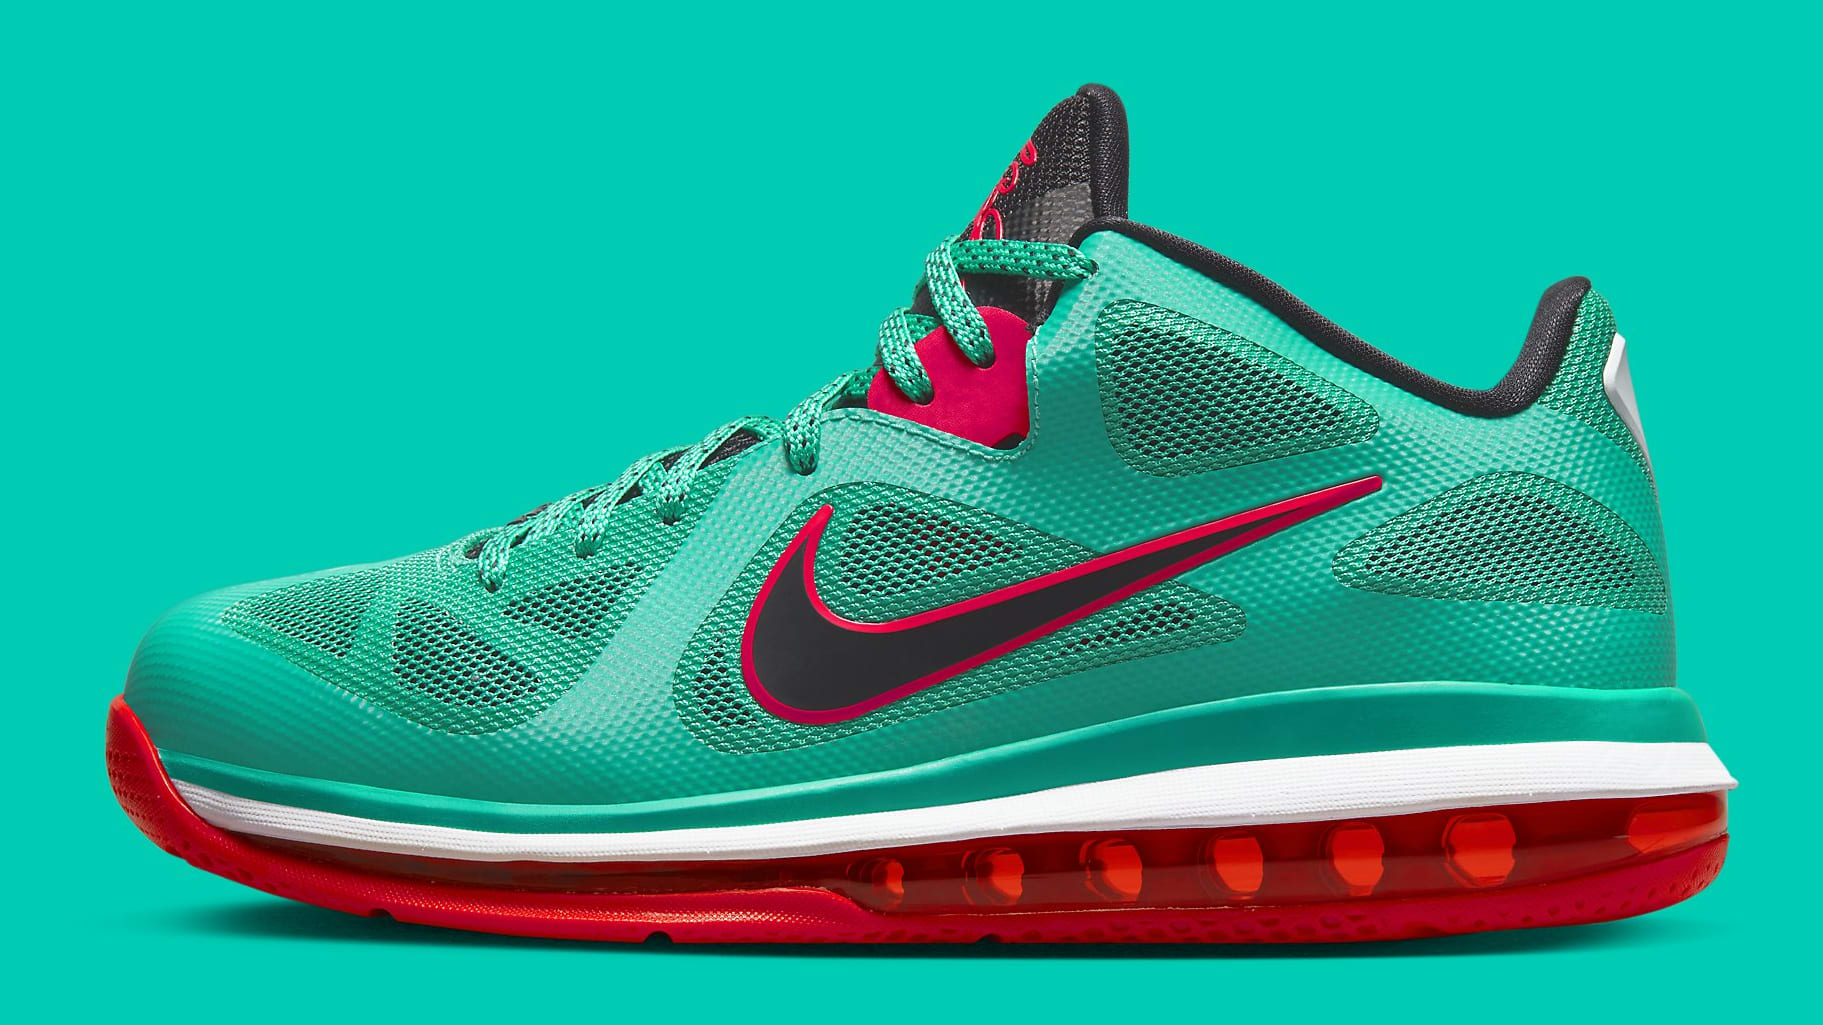 Nike LeBron 9 Low Reverse Liverpool DQ6400-300 Release Date